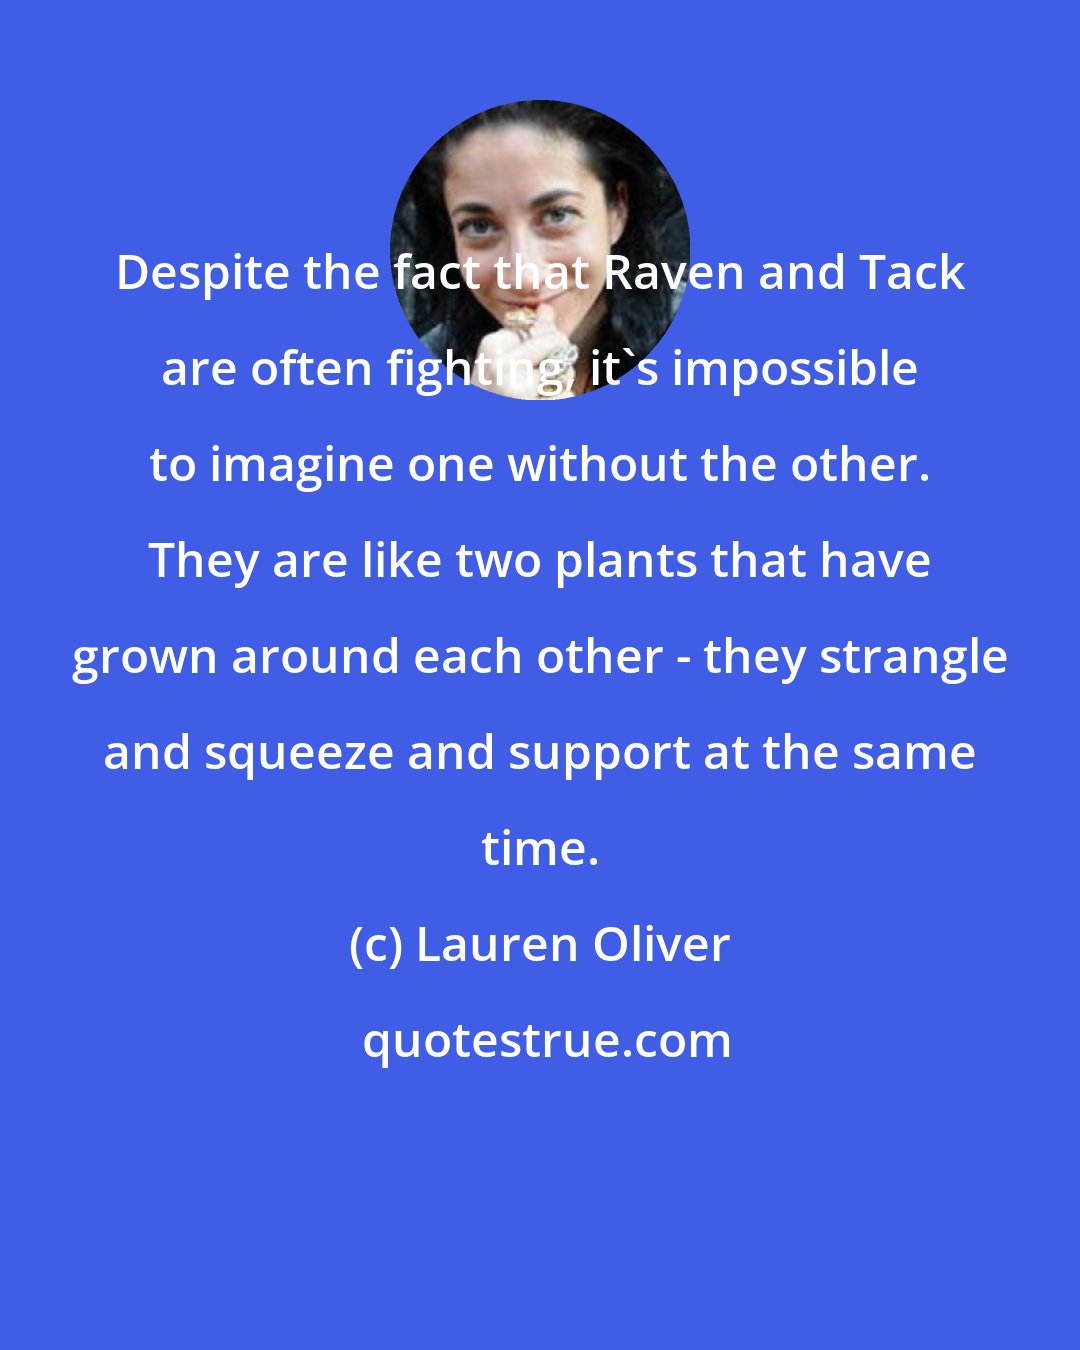 Lauren Oliver: Despite the fact that Raven and Tack are often fighting, it's impossible to imagine one without the other. They are like two plants that have grown around each other - they strangle and squeeze and support at the same time.